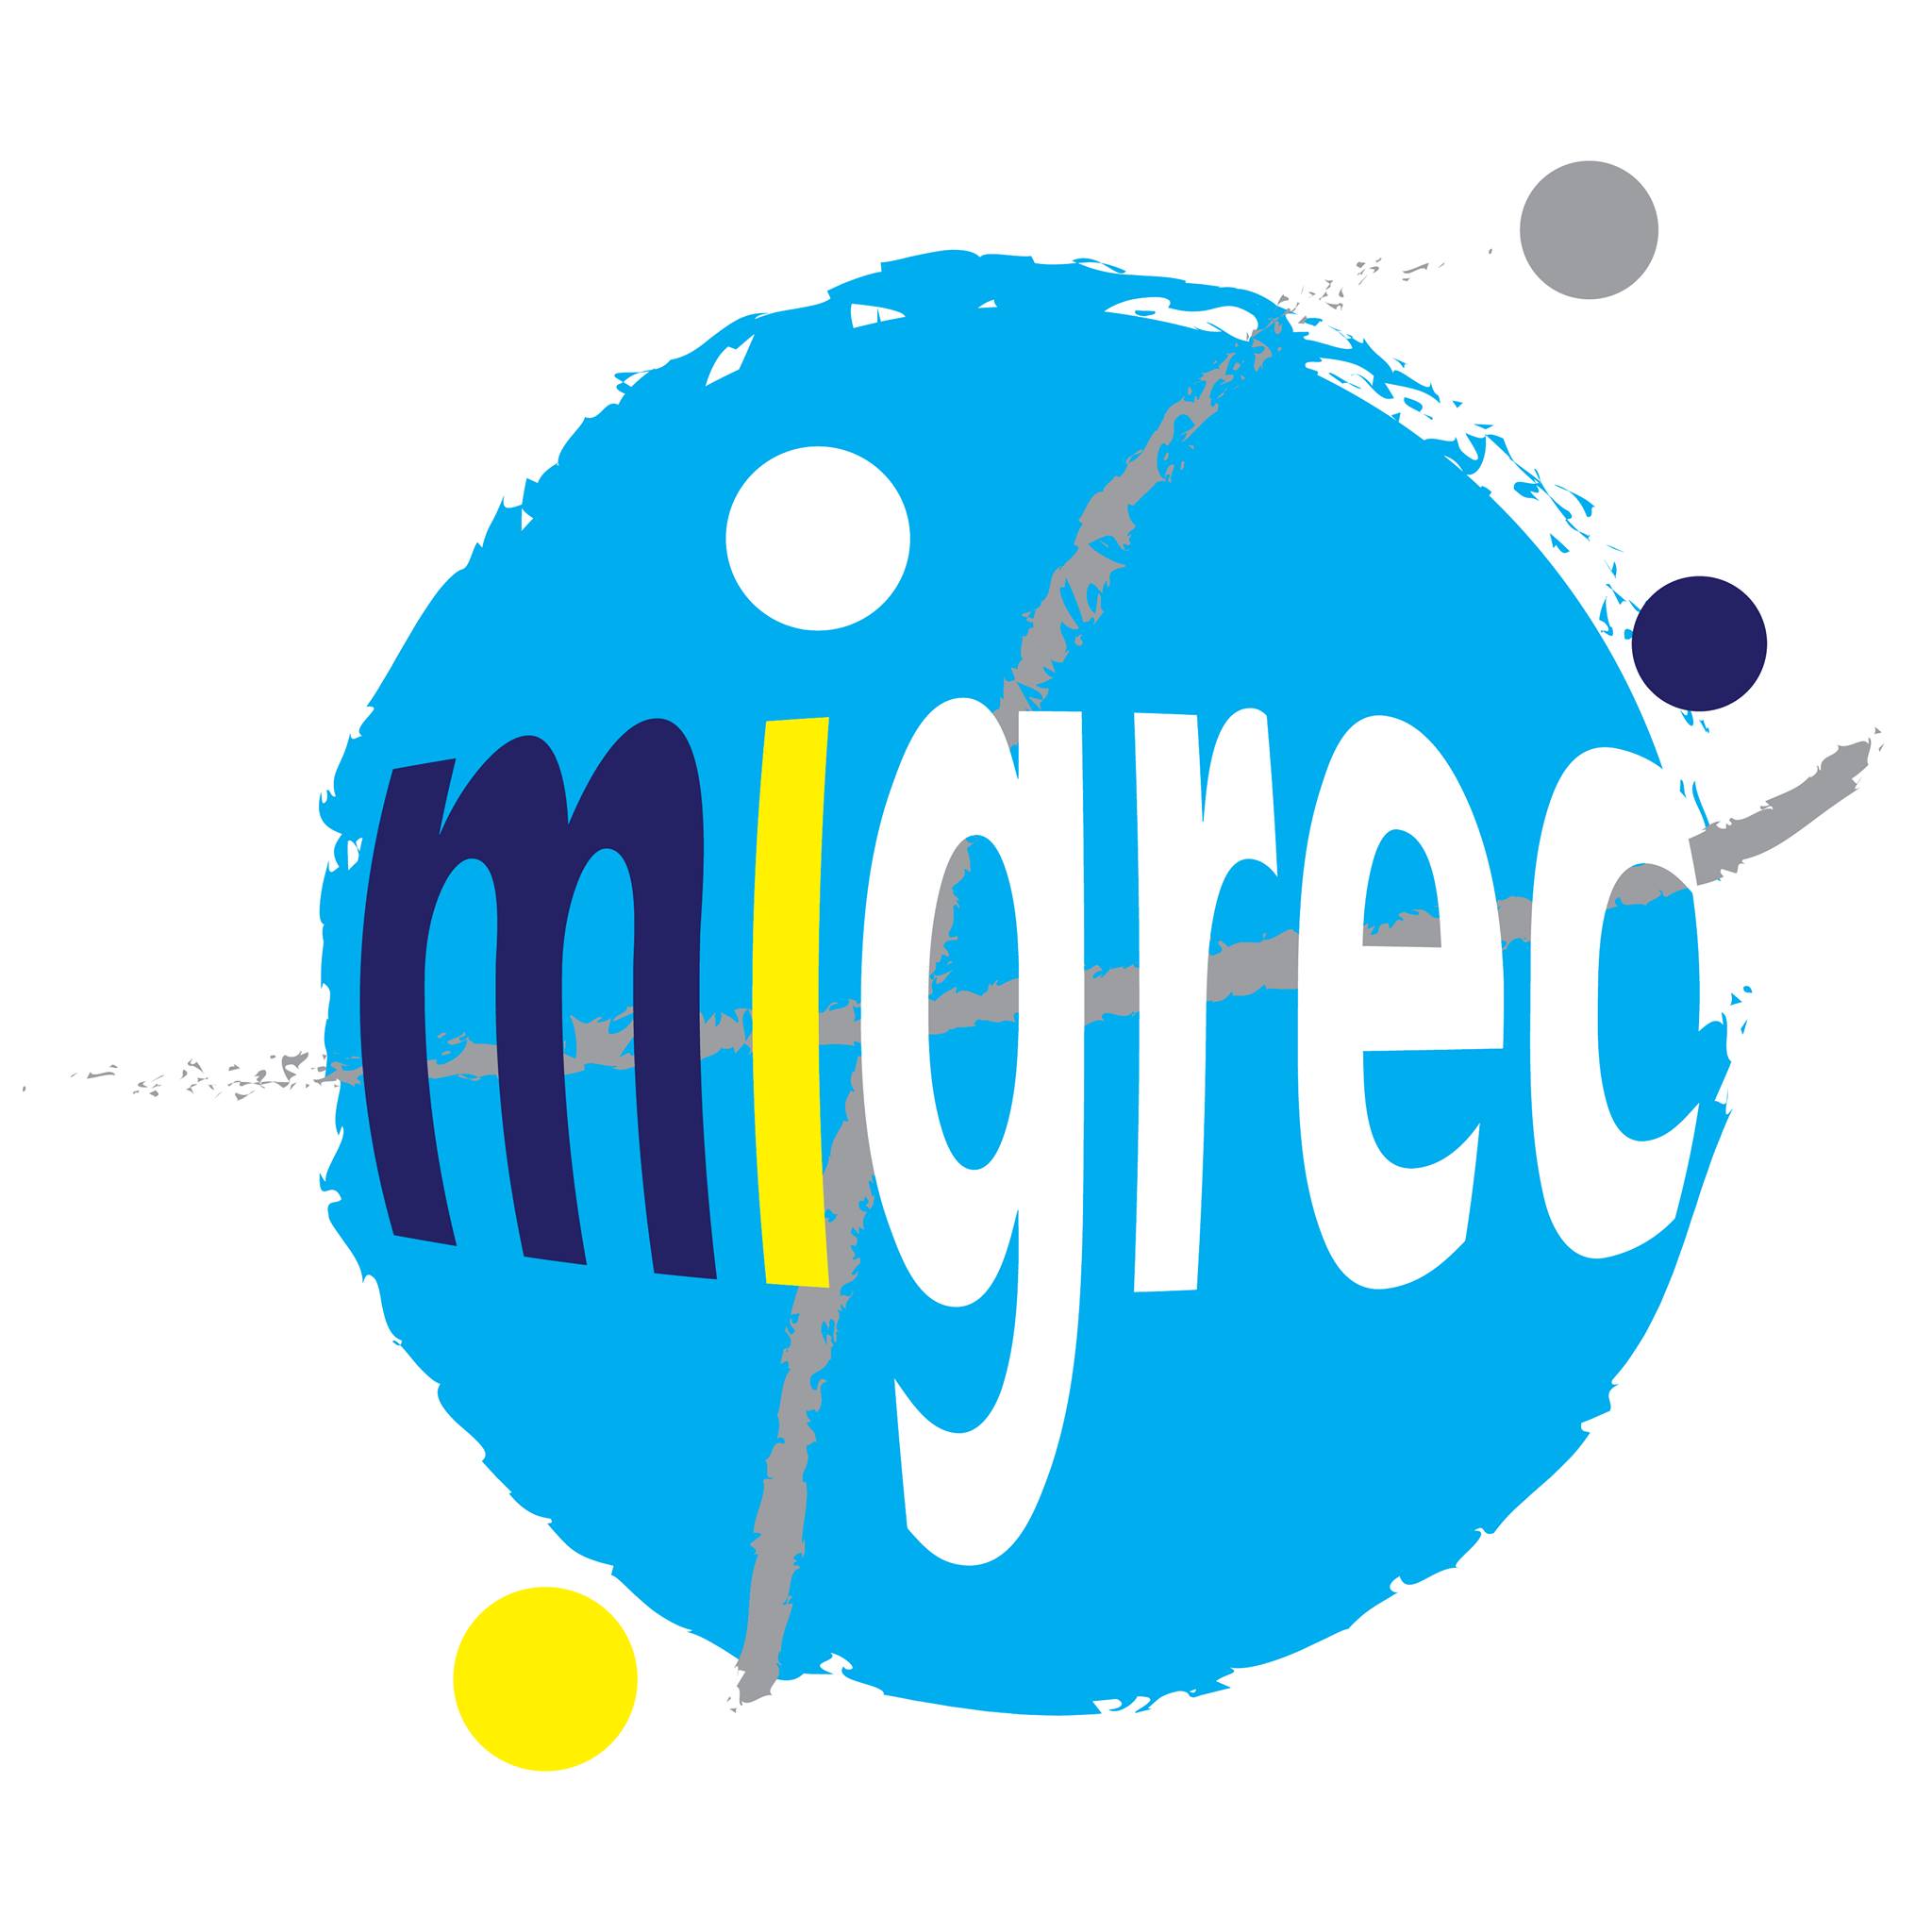 MIGREC project – Newsletter #4